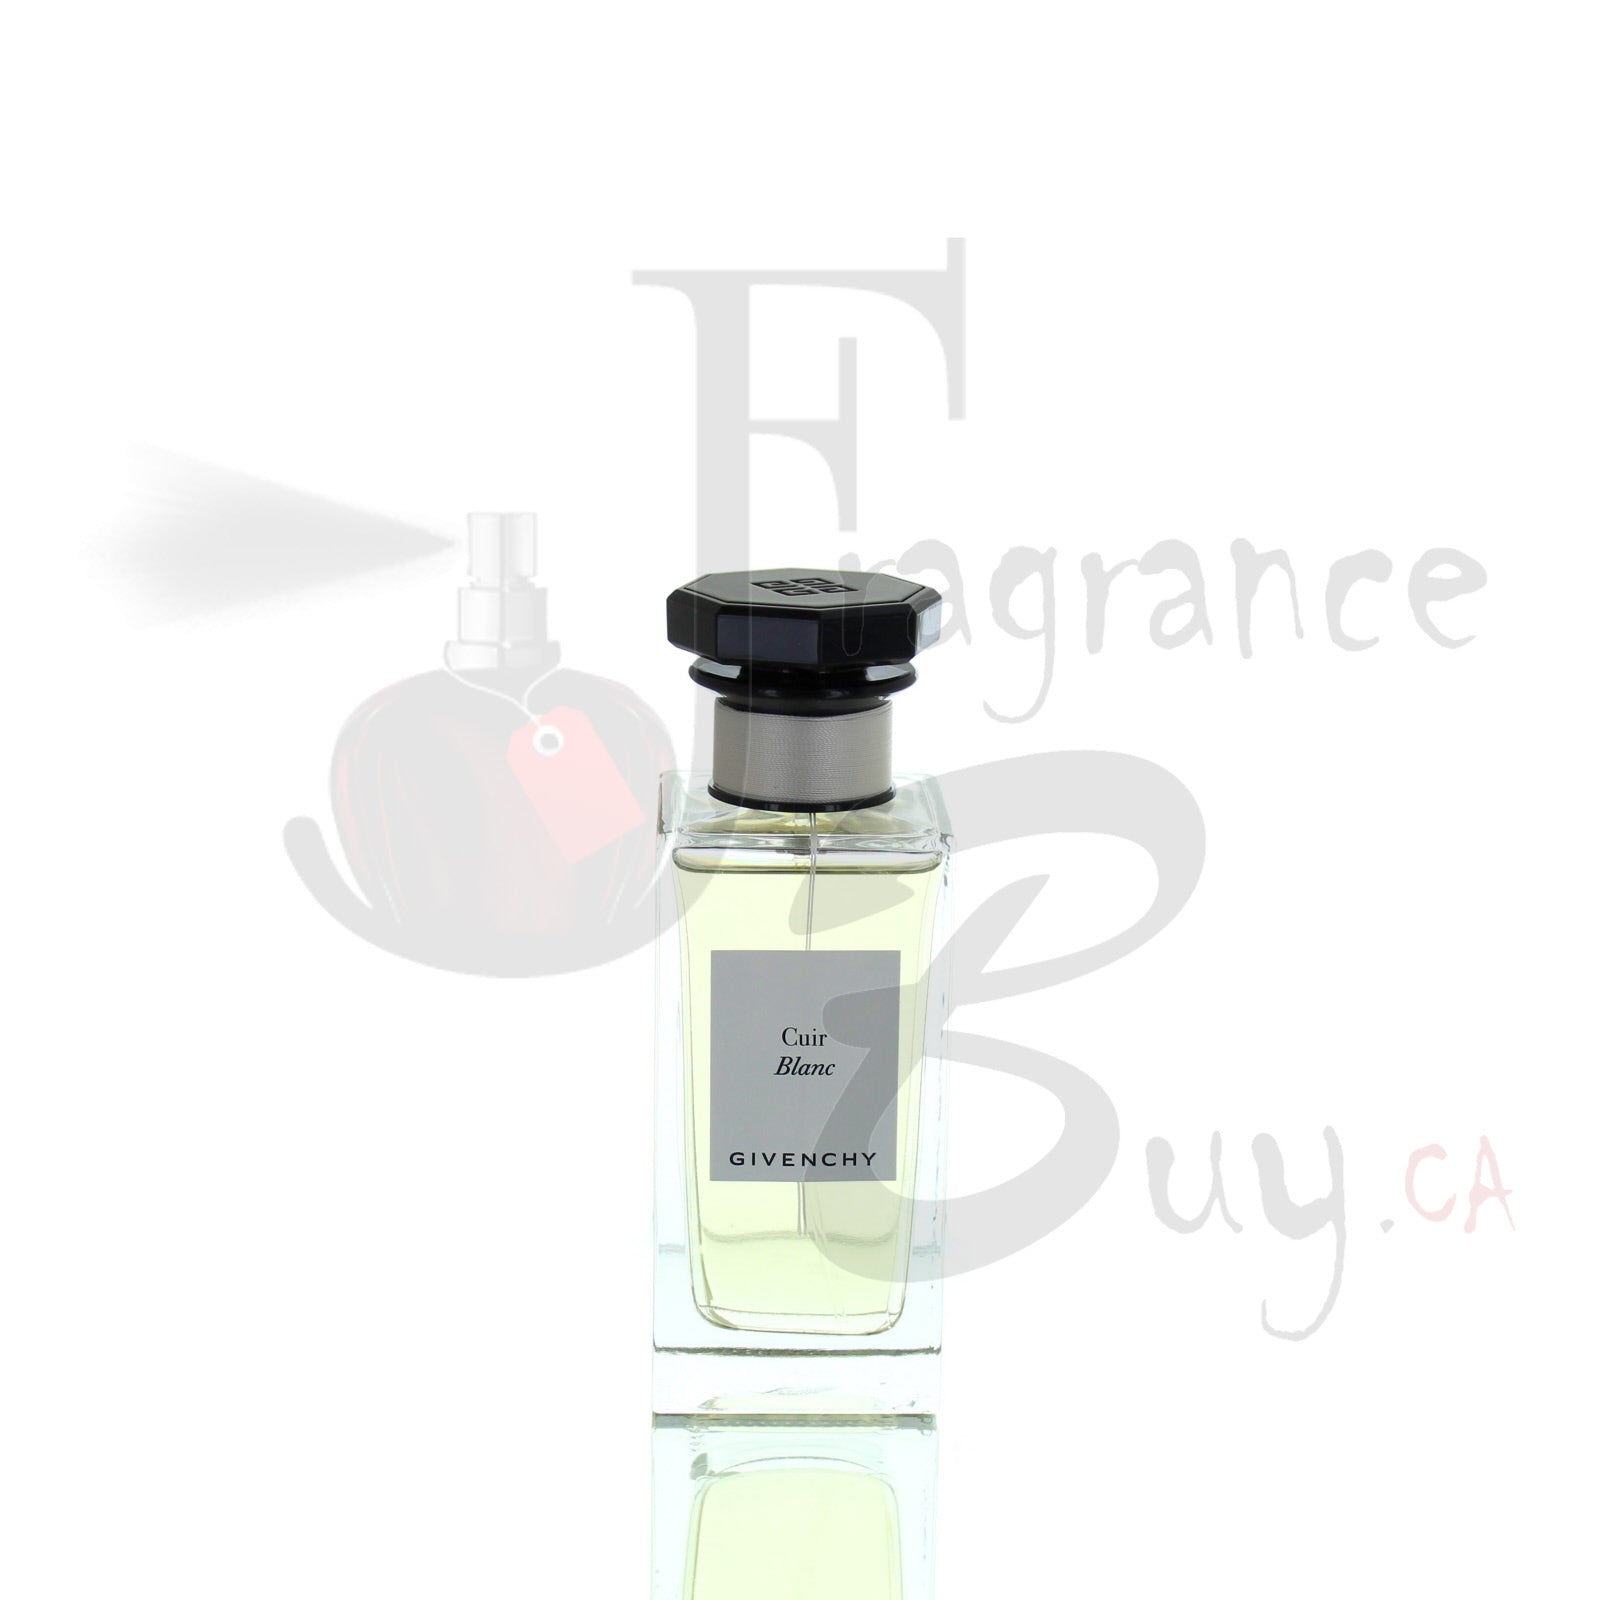 givenchy cuir blanc price